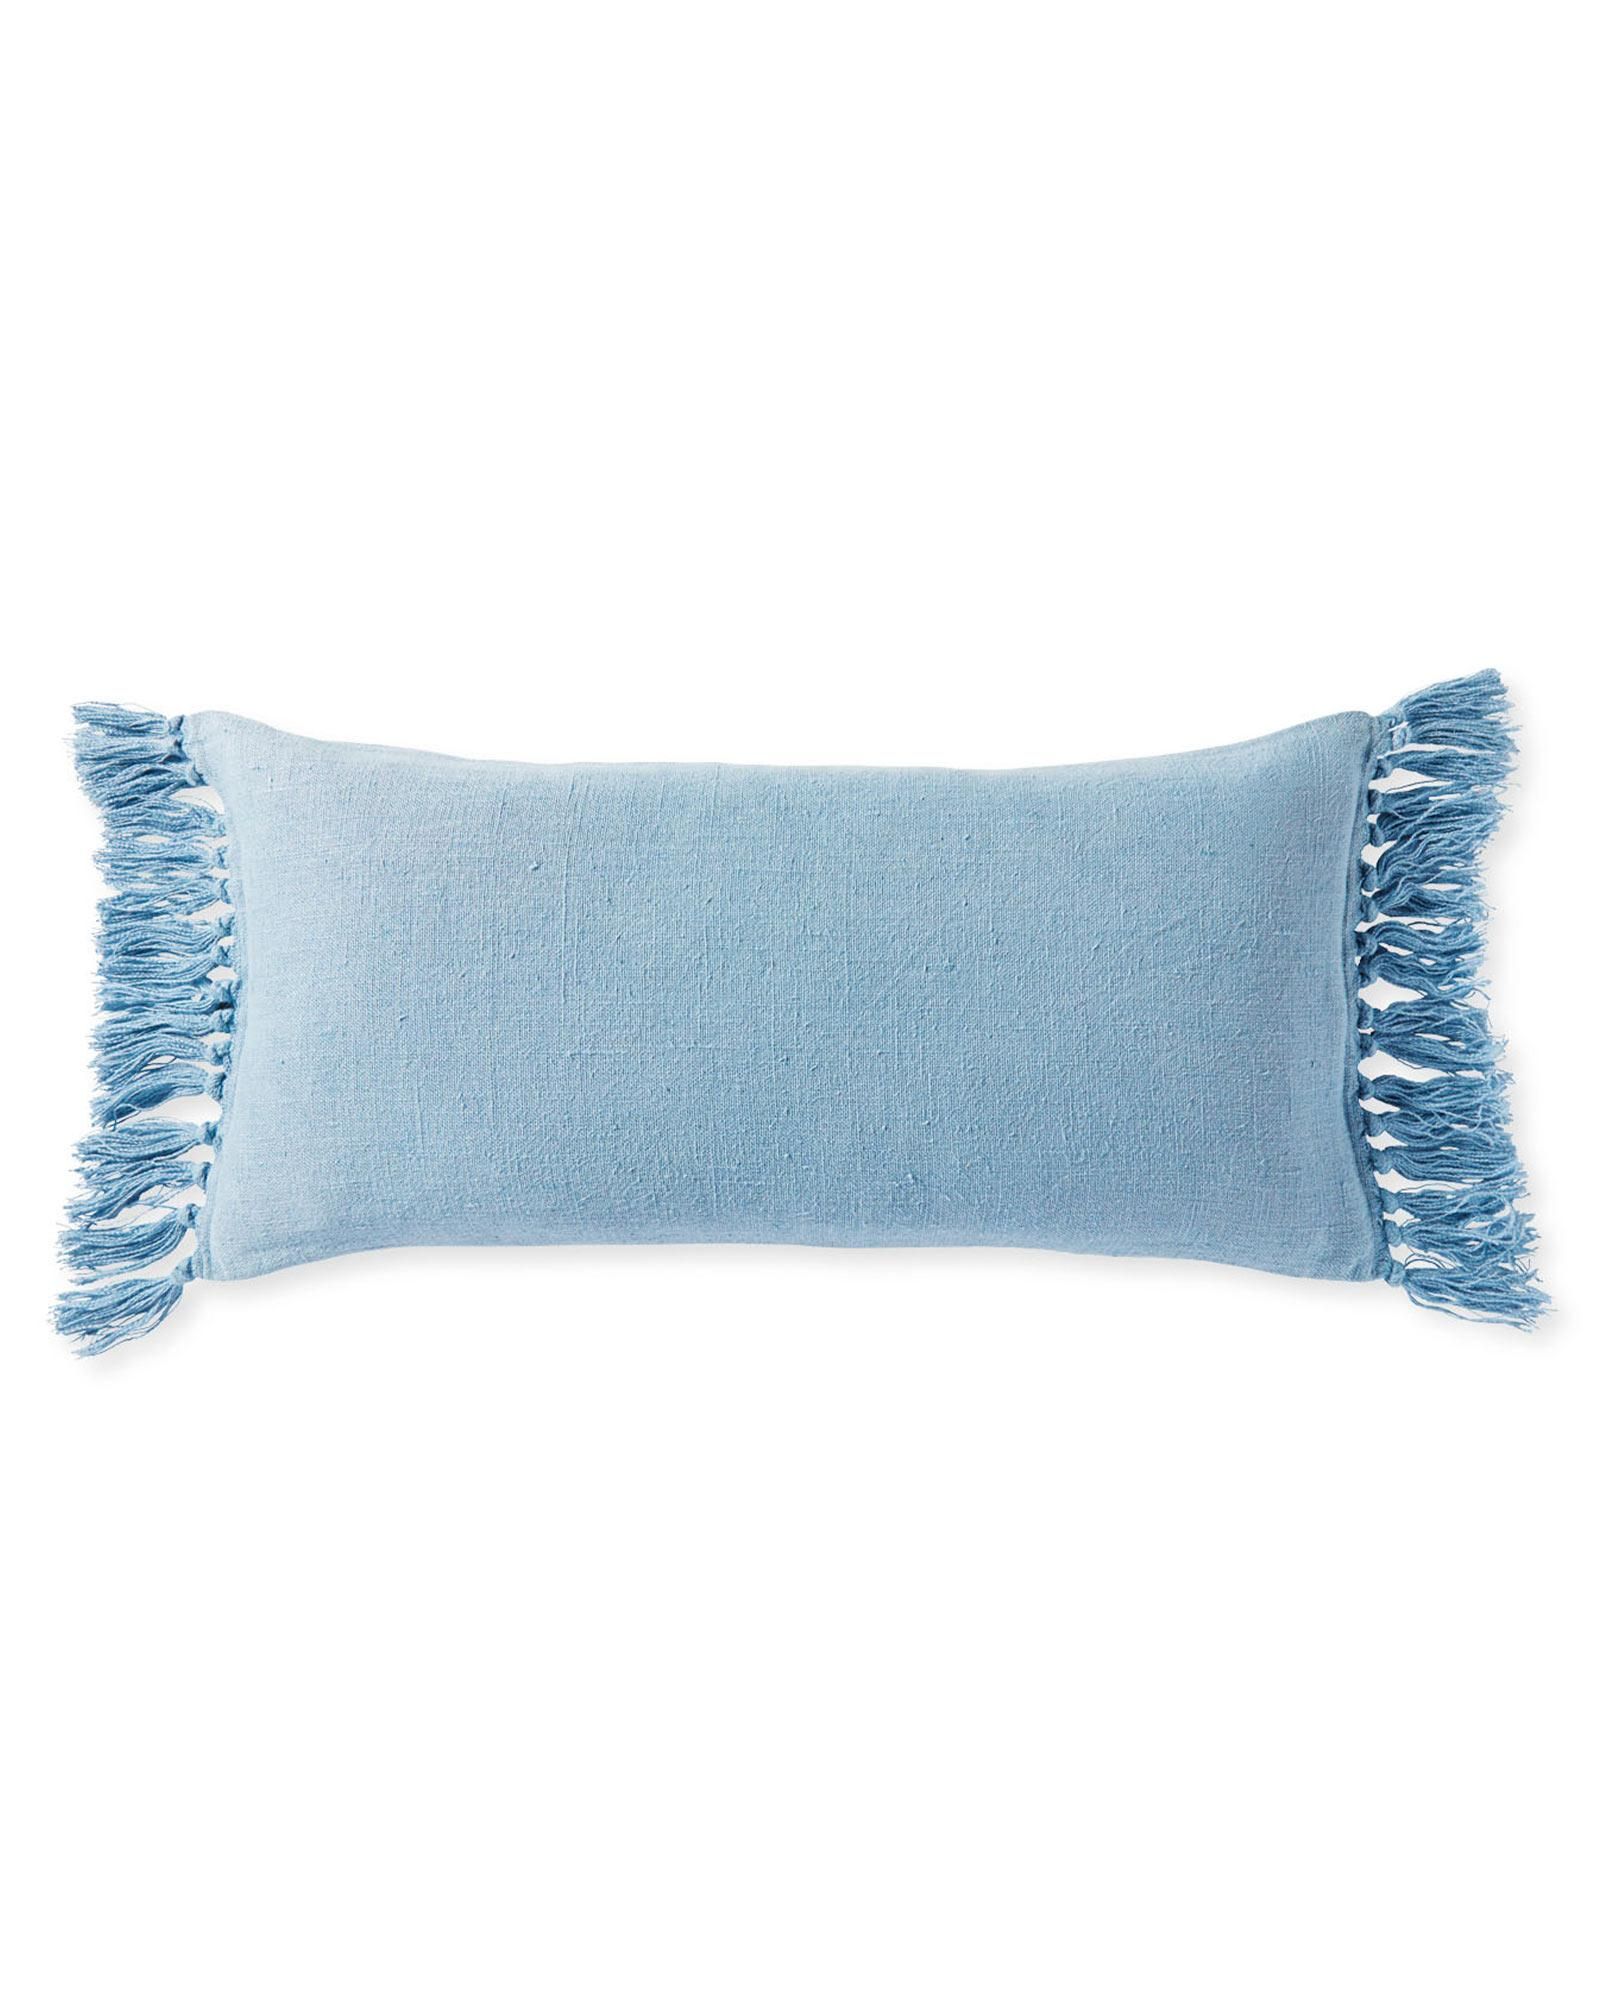 Mendocino Pillow Cover | Serena and Lily